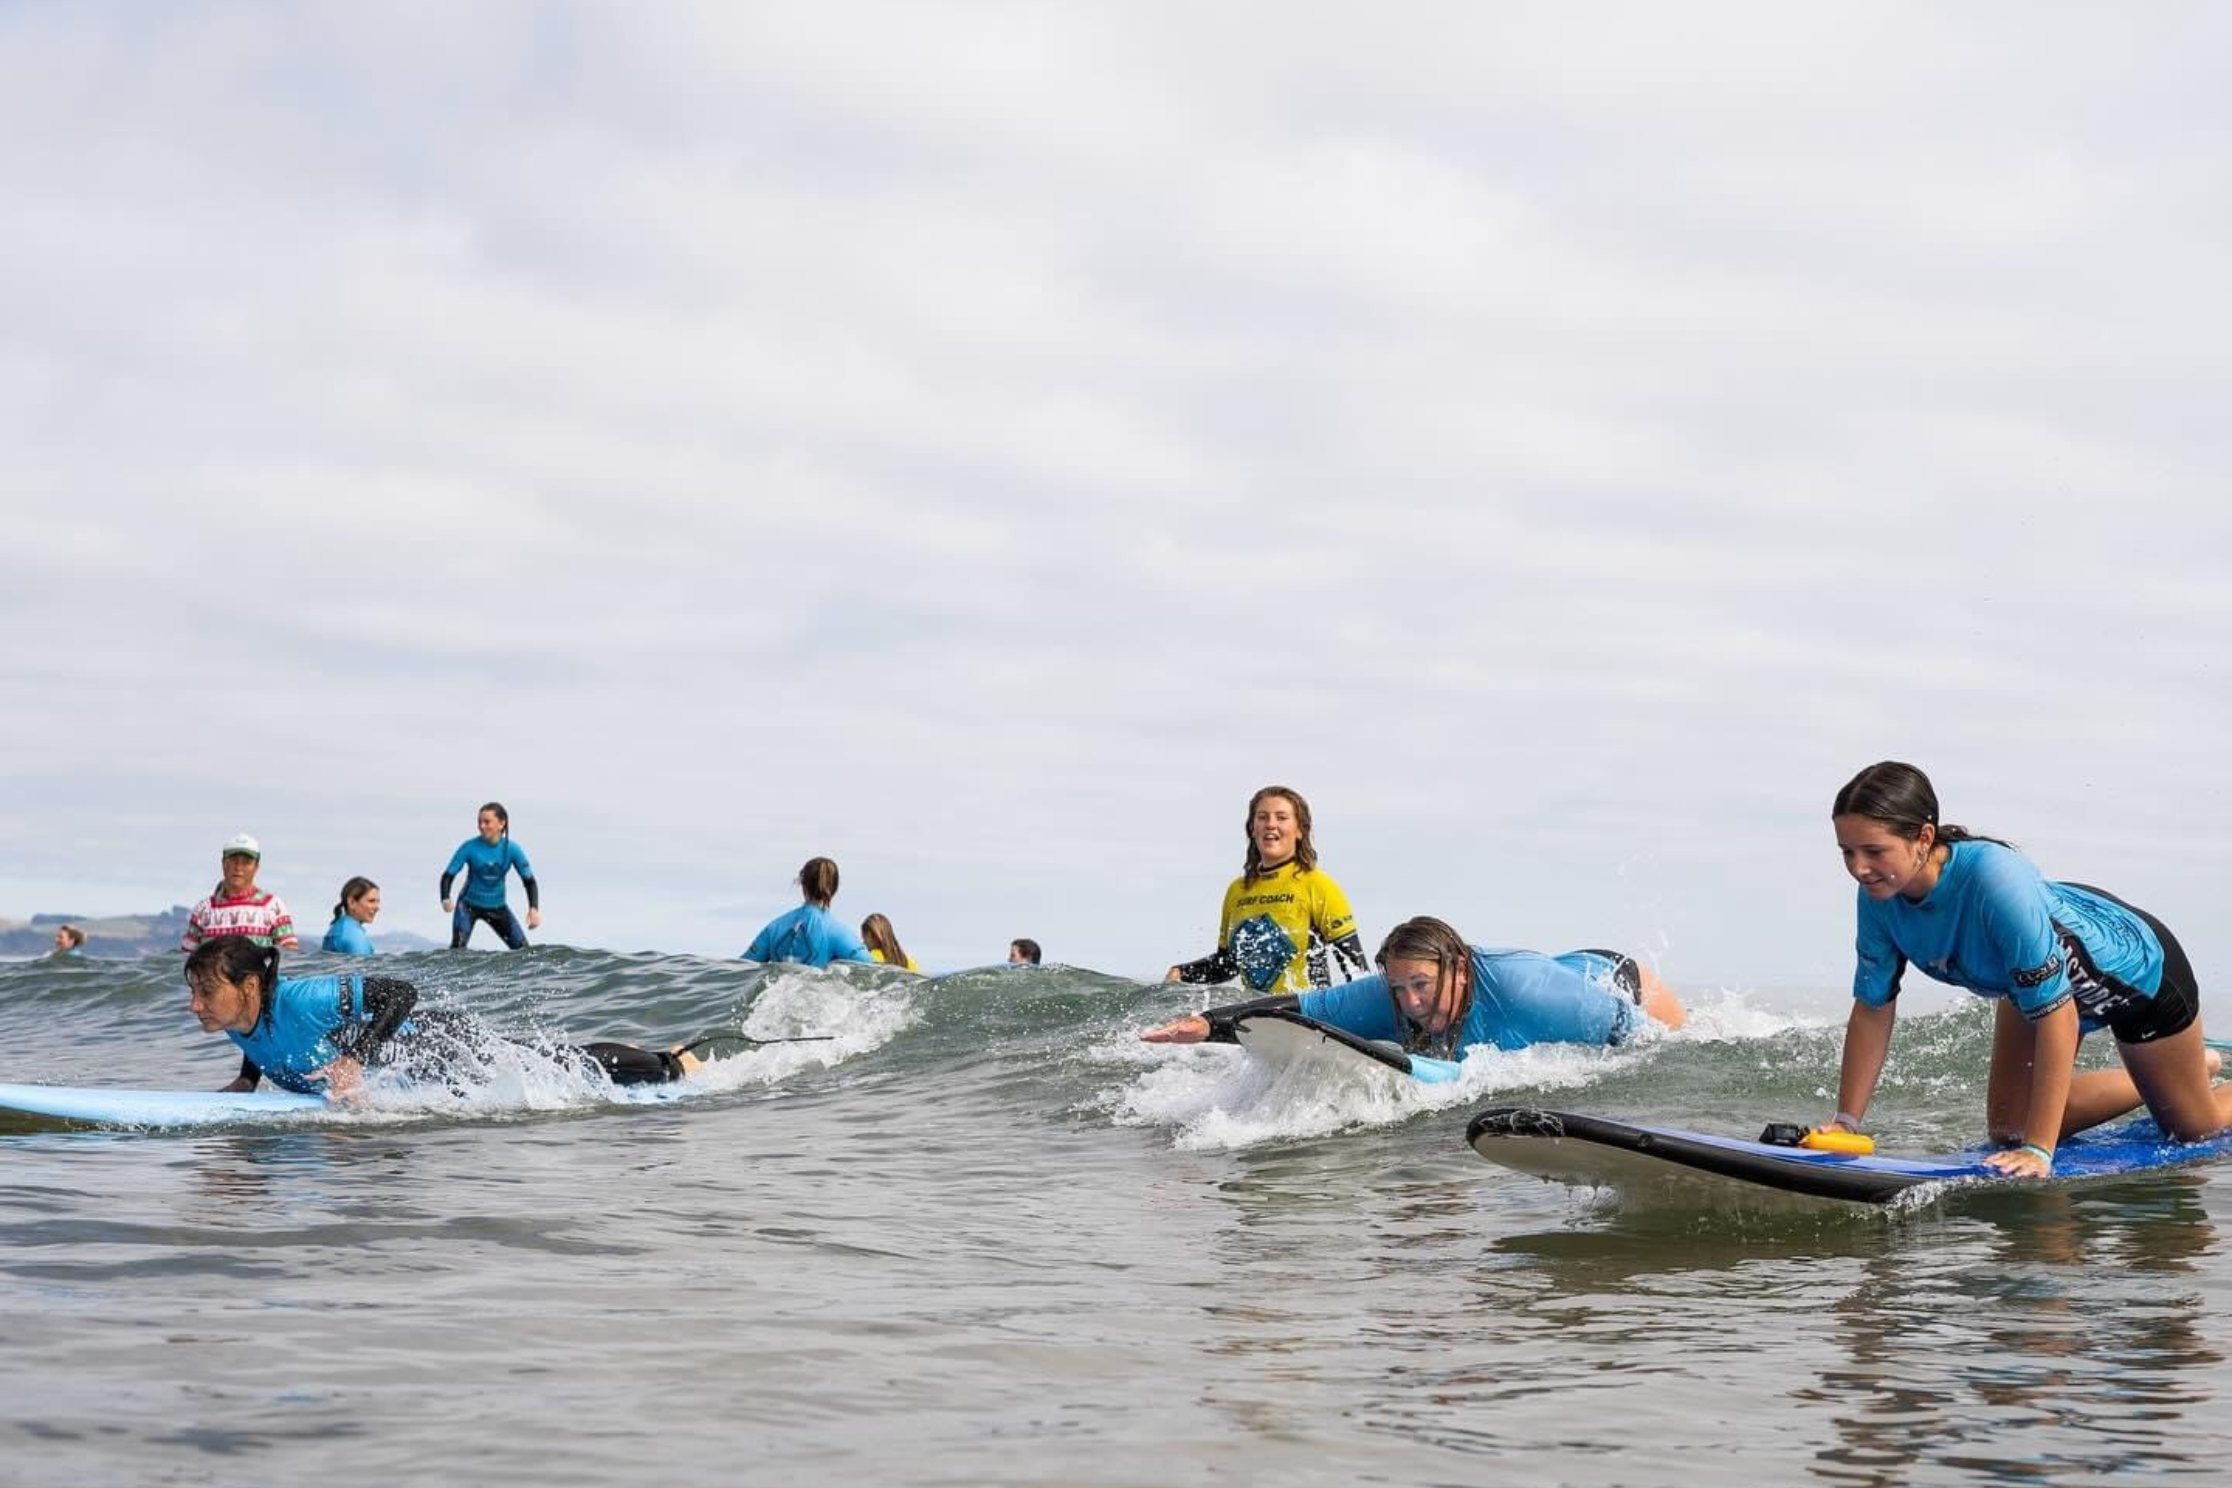 A group of young Tasmanian women on surboards in the ocean